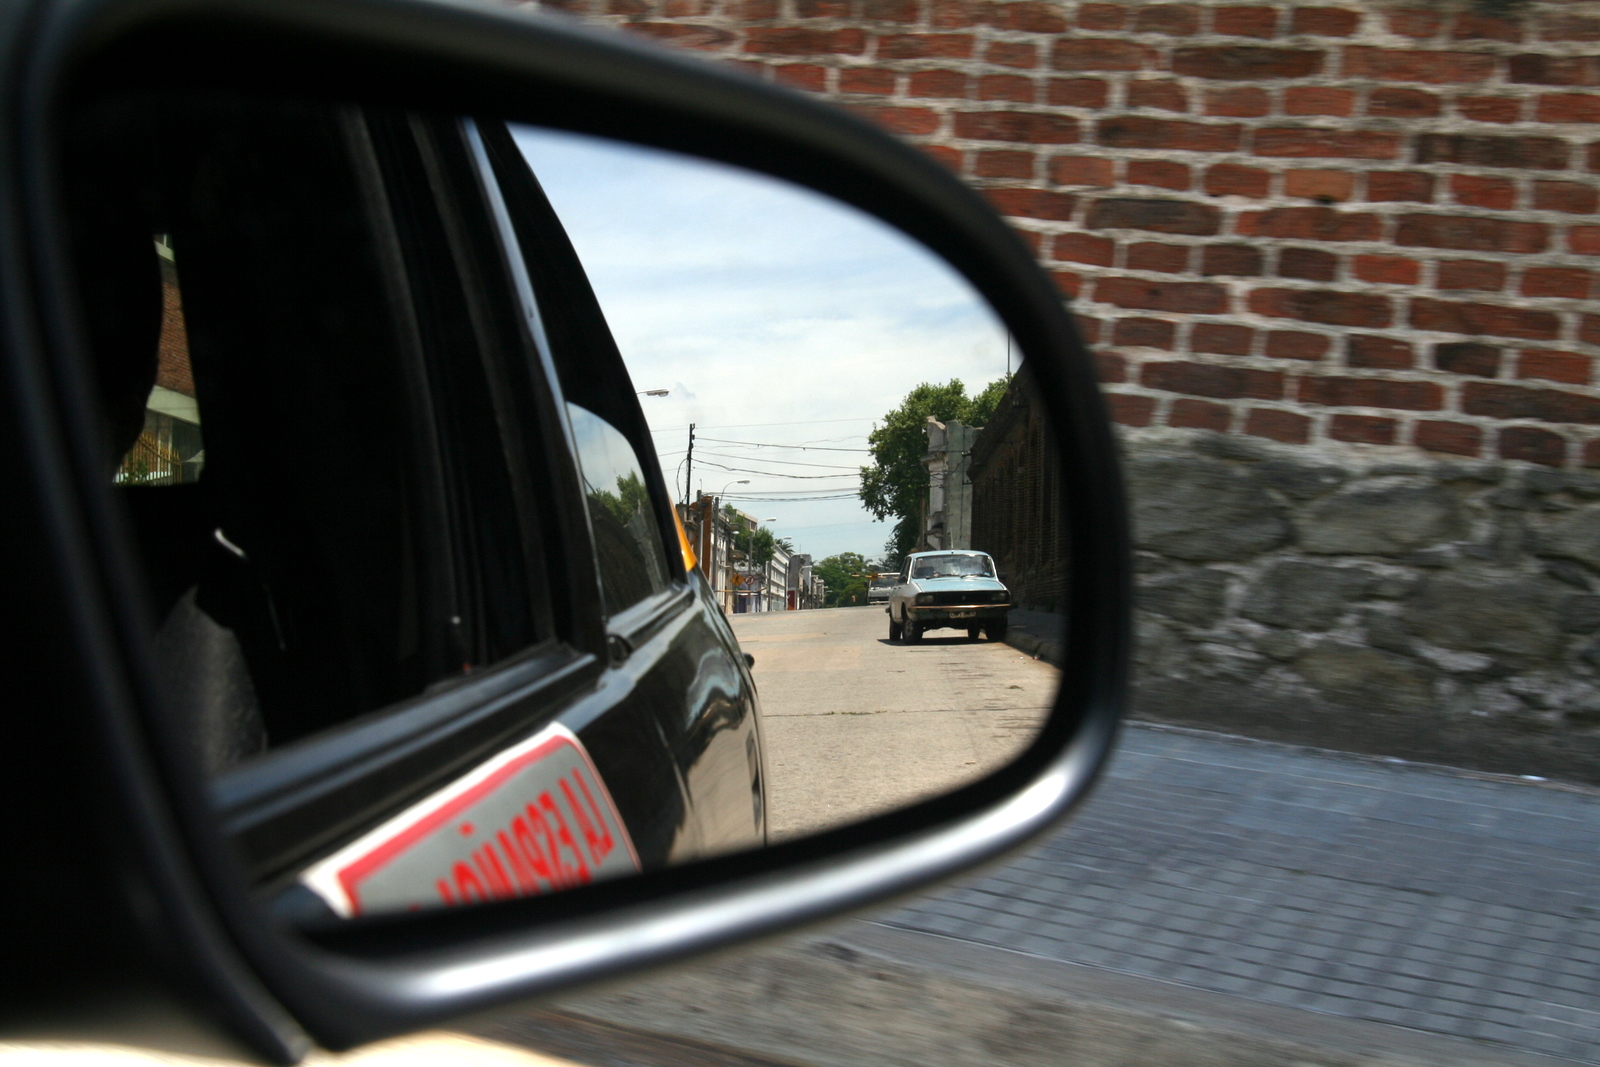 a side mirror is showing a view of a car in the road